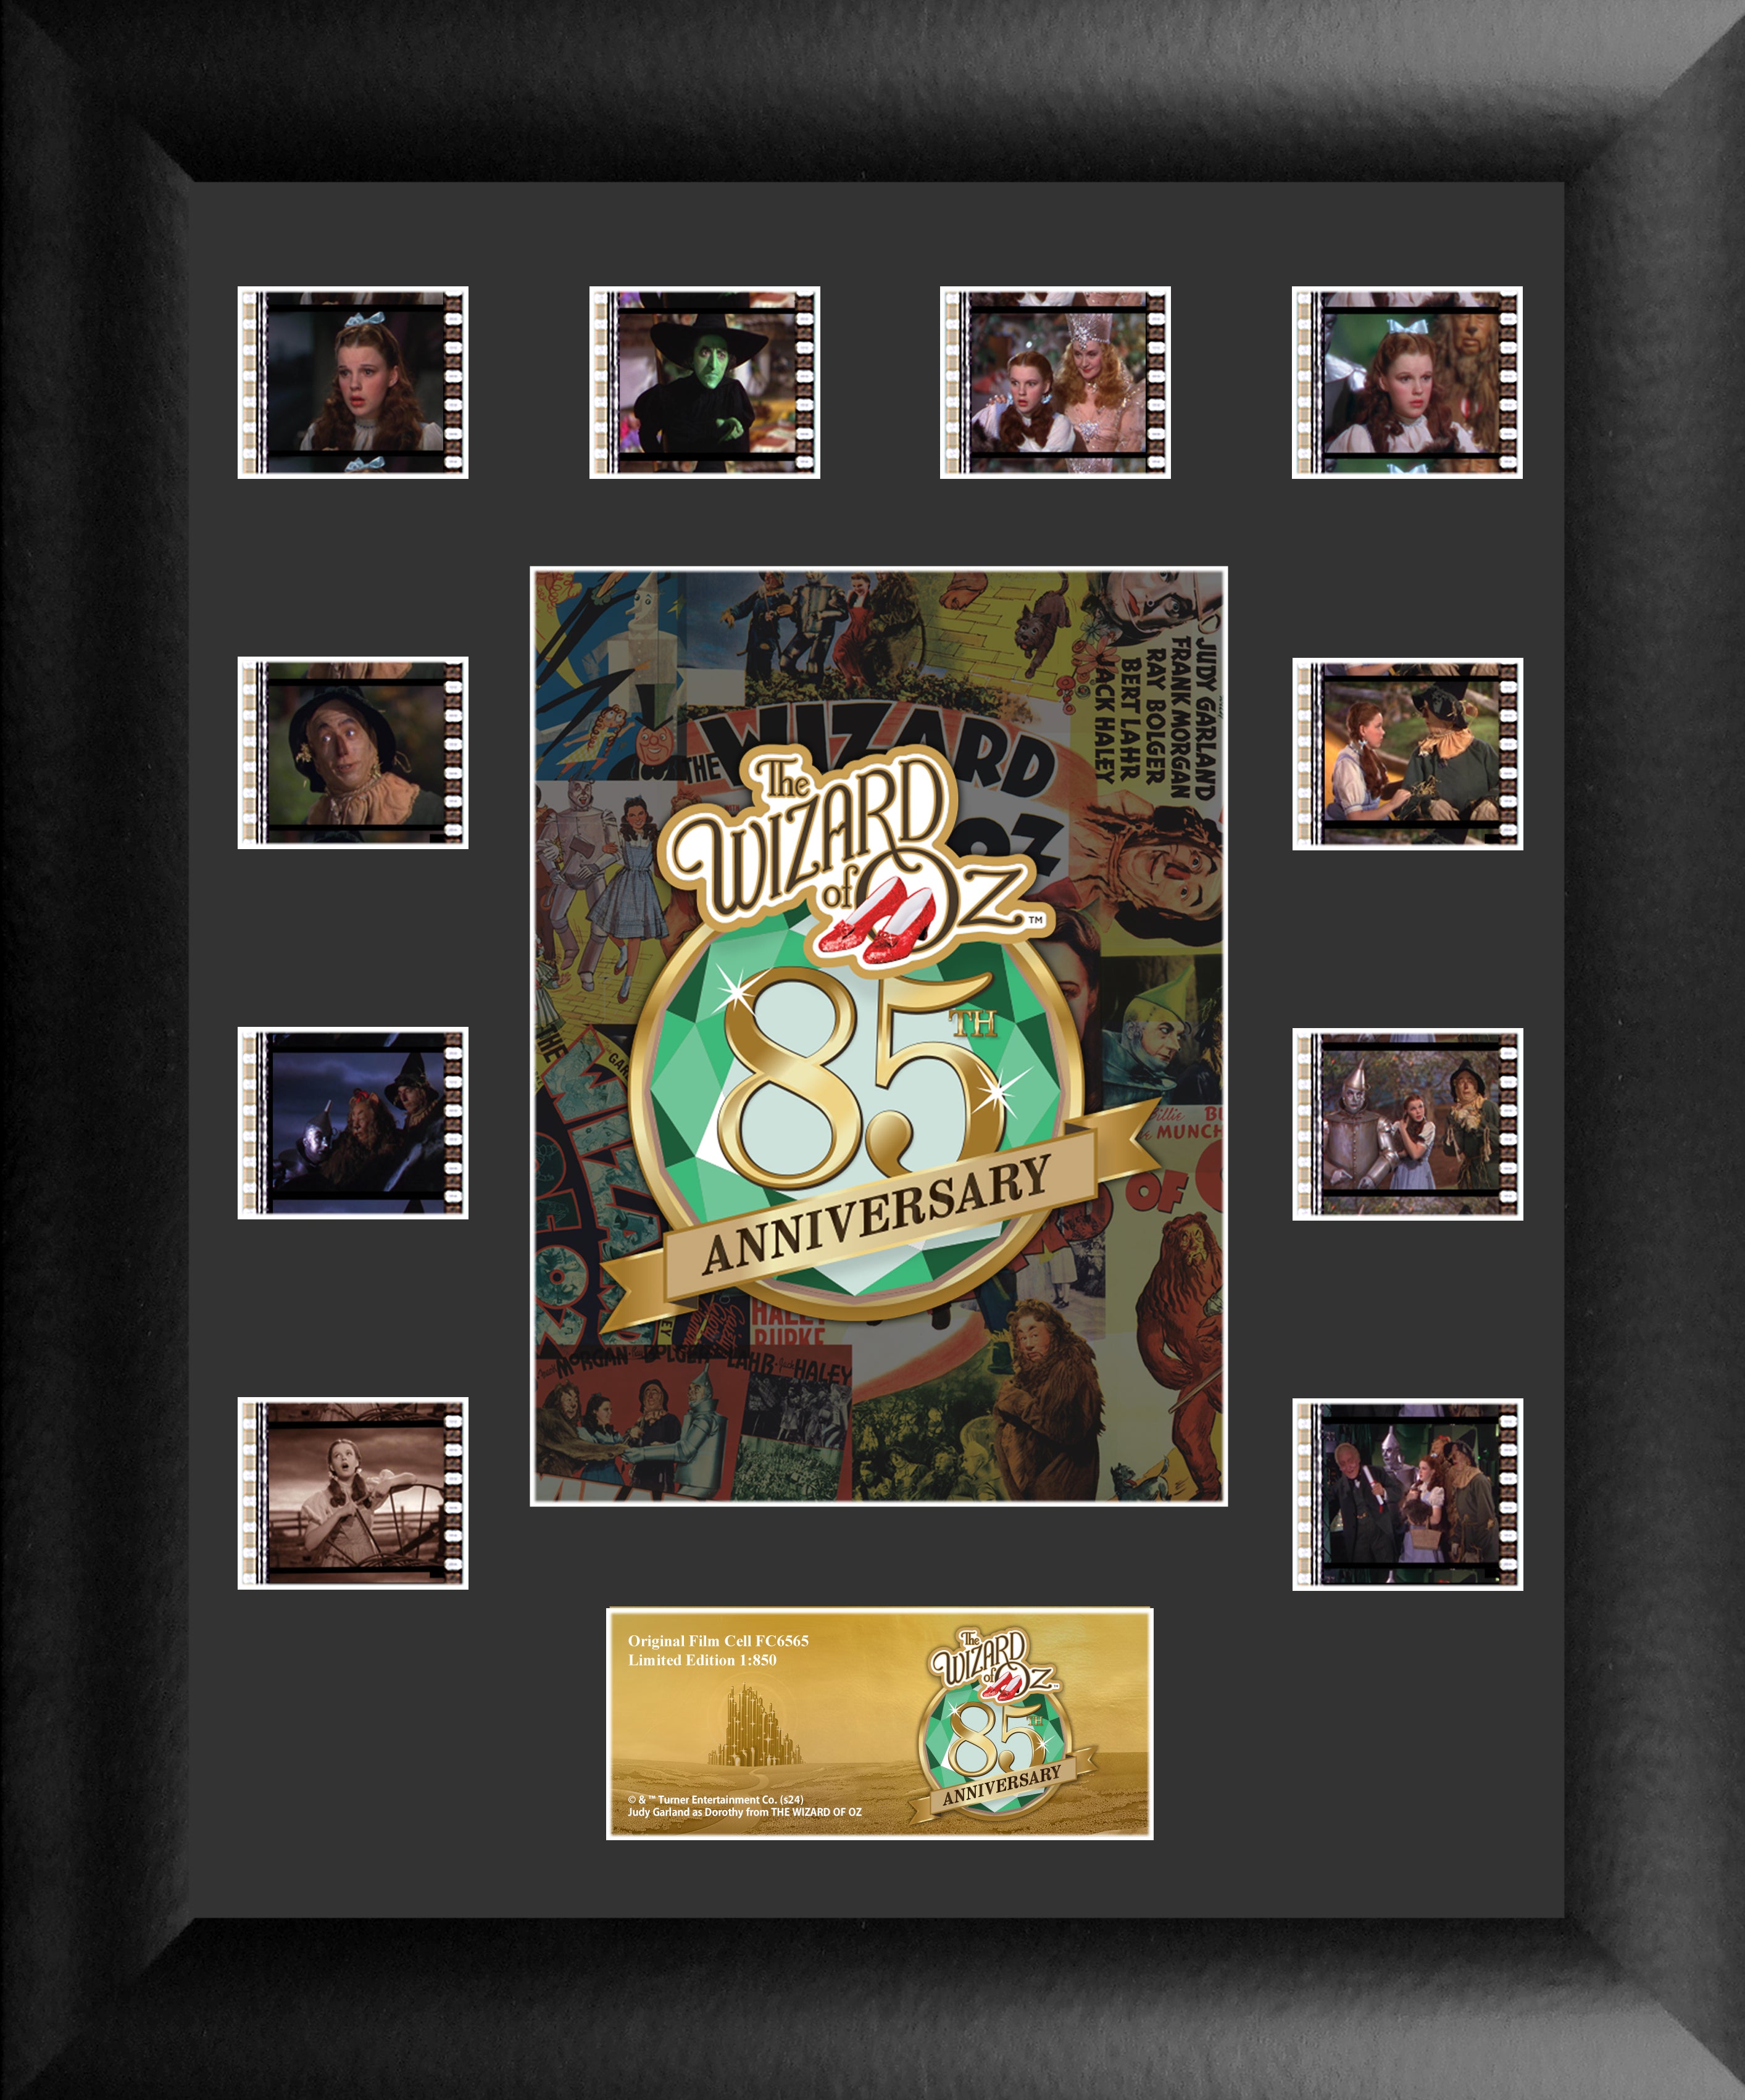 The Wizard of Oz (85th Anniversary - Official Logo) FilmCells Presentation Mini Montage Framed Art USFC6565